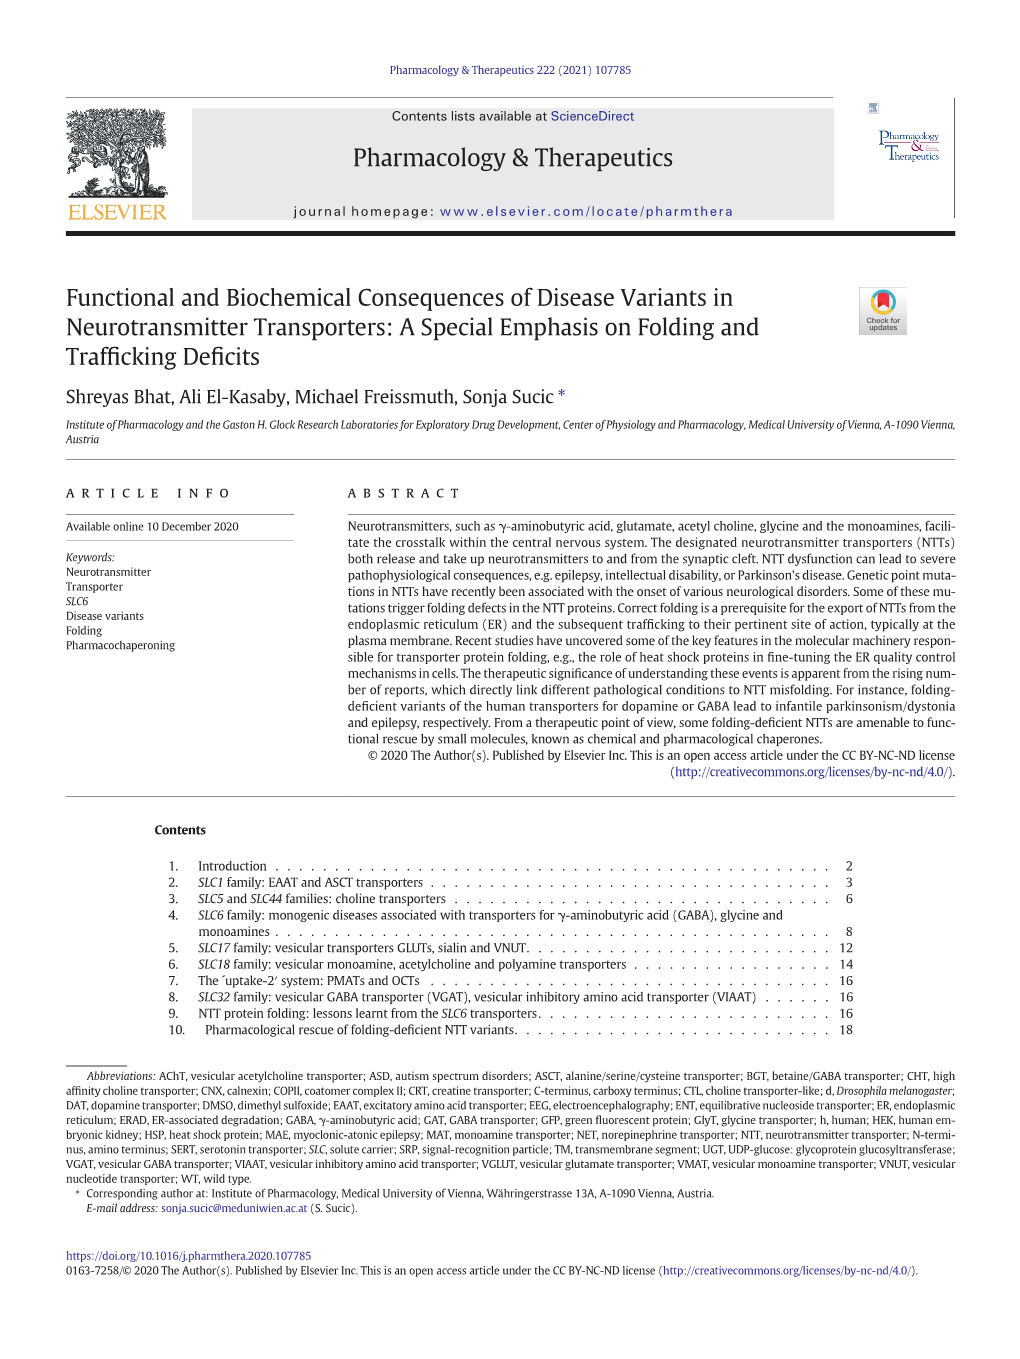 Functional and Biochemical Consequences of Disease Variants in Neurotransmitter Transporters: a Special Emphasis on Folding and Trafﬁcking Deﬁcits